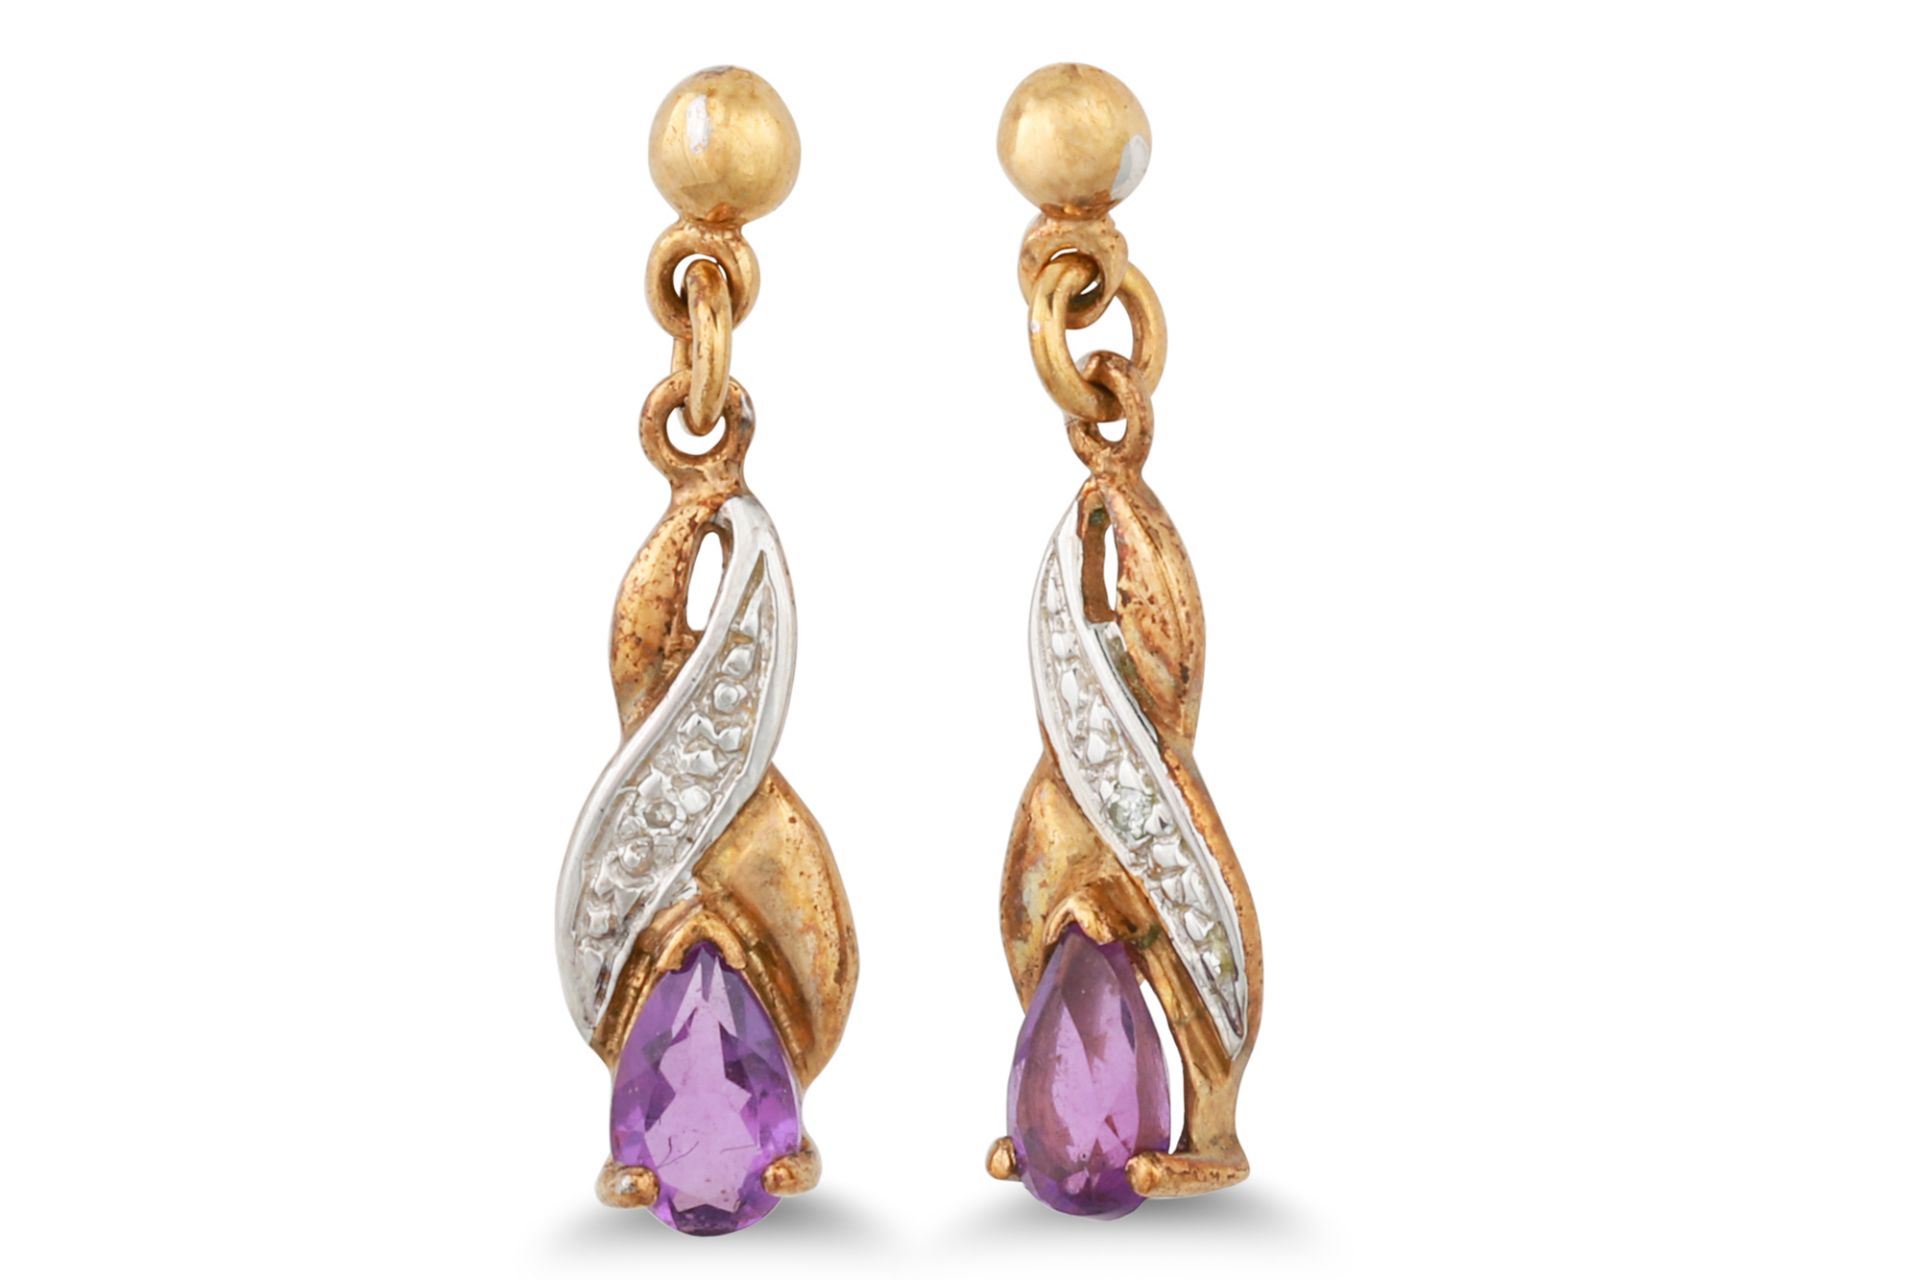 A PAIR OF DIAMOND AND AMETHYST DROP EARRINGS, mounted in white and yellow gold